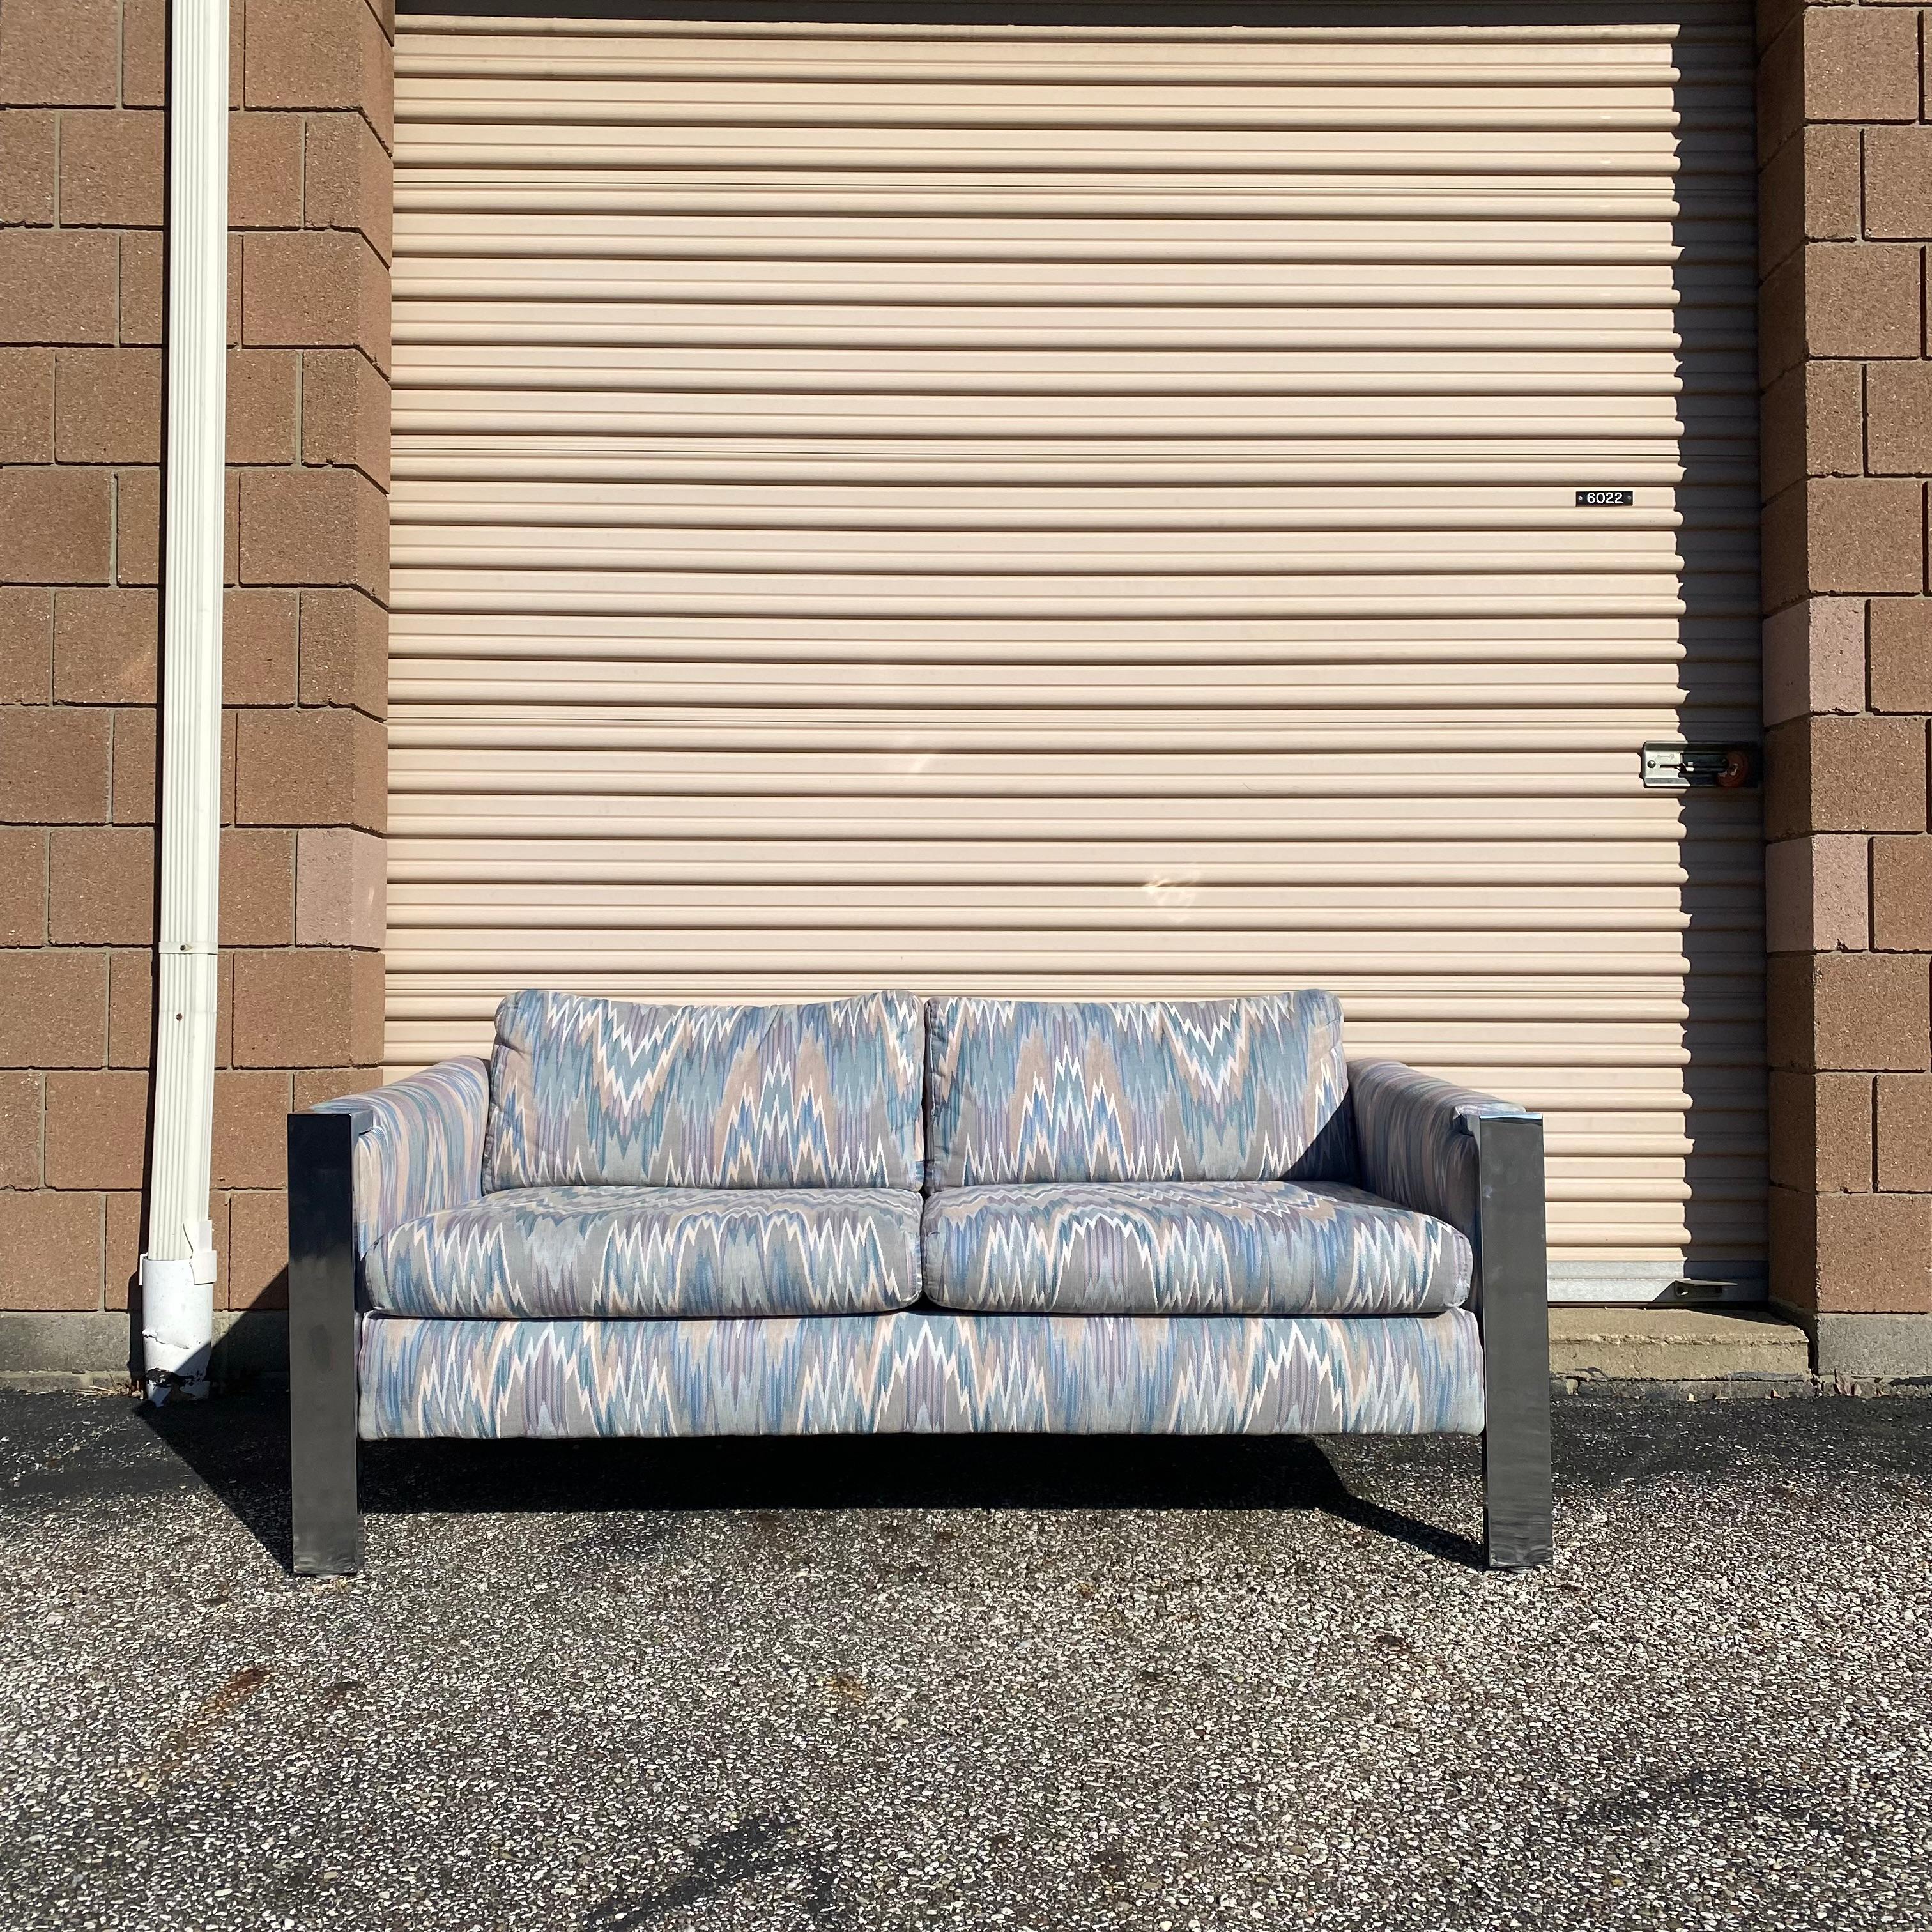 This is a very nice Mid-Century Modern petite two-seat sofa made by Selig, ca. 1960's. The original owners who I bought it from had Selig stools to match. In the 1980's they had everything reupholstered for a home renovation. 

Condition: this